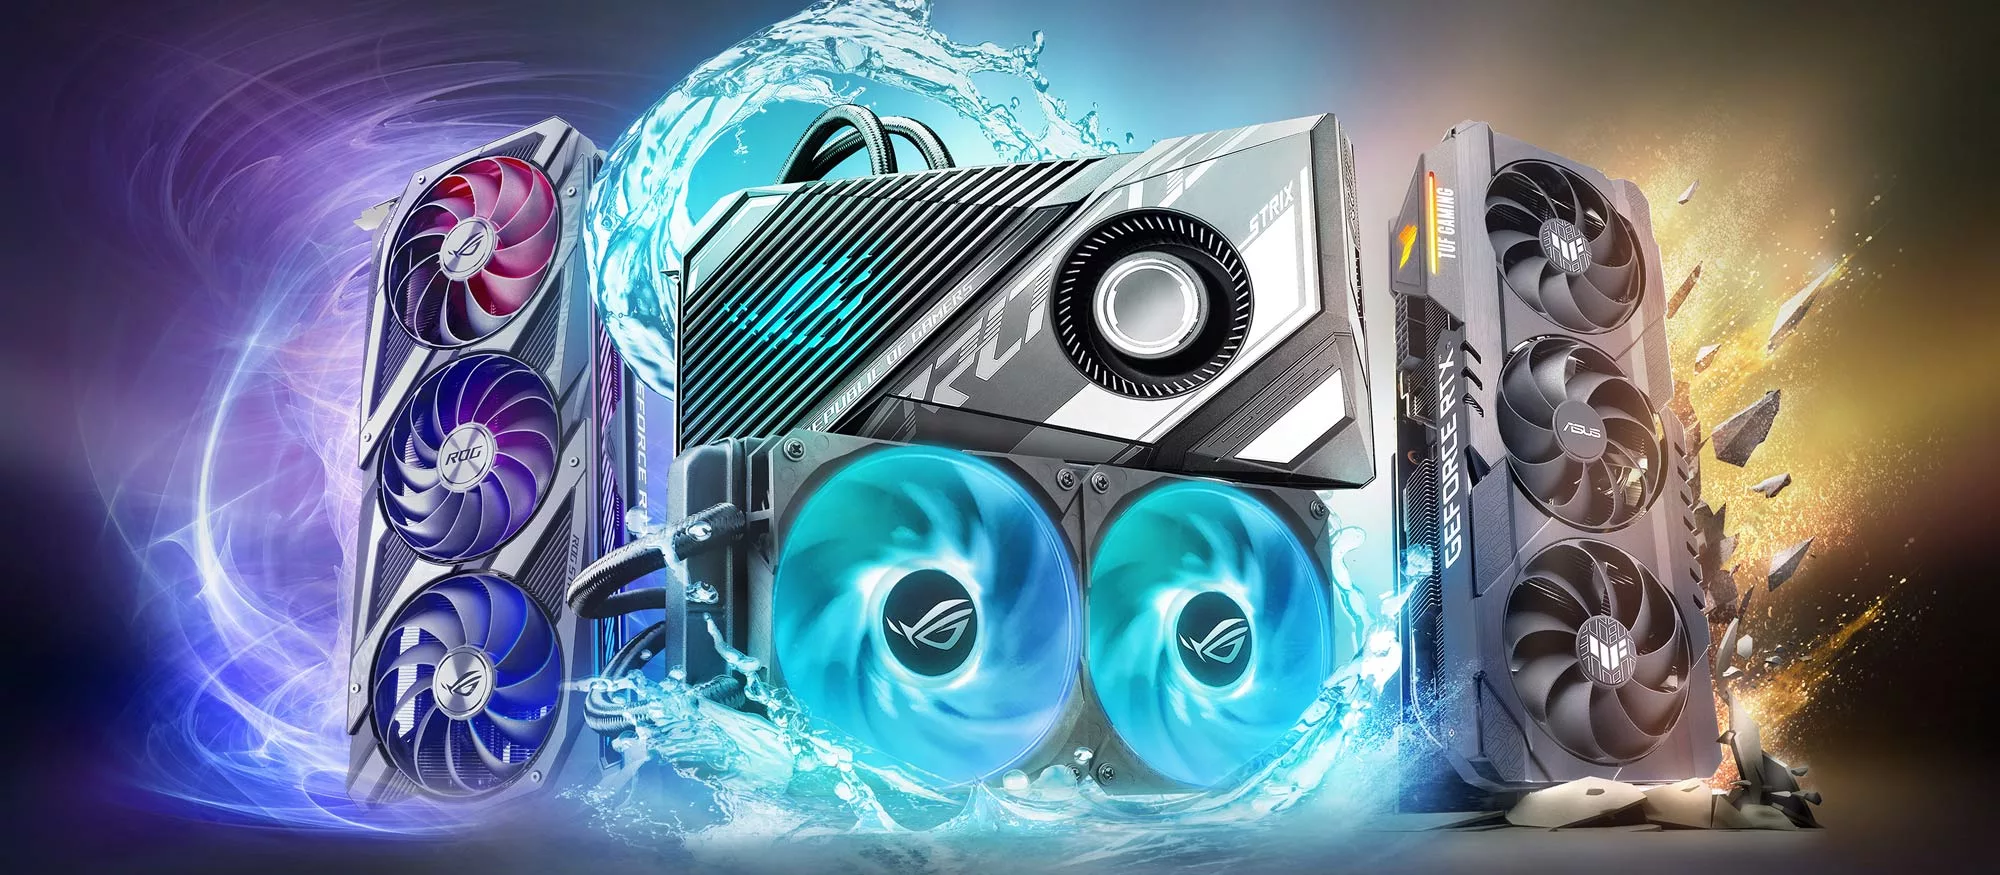 A render of three ASUS graphics cards with colored backgrounds.